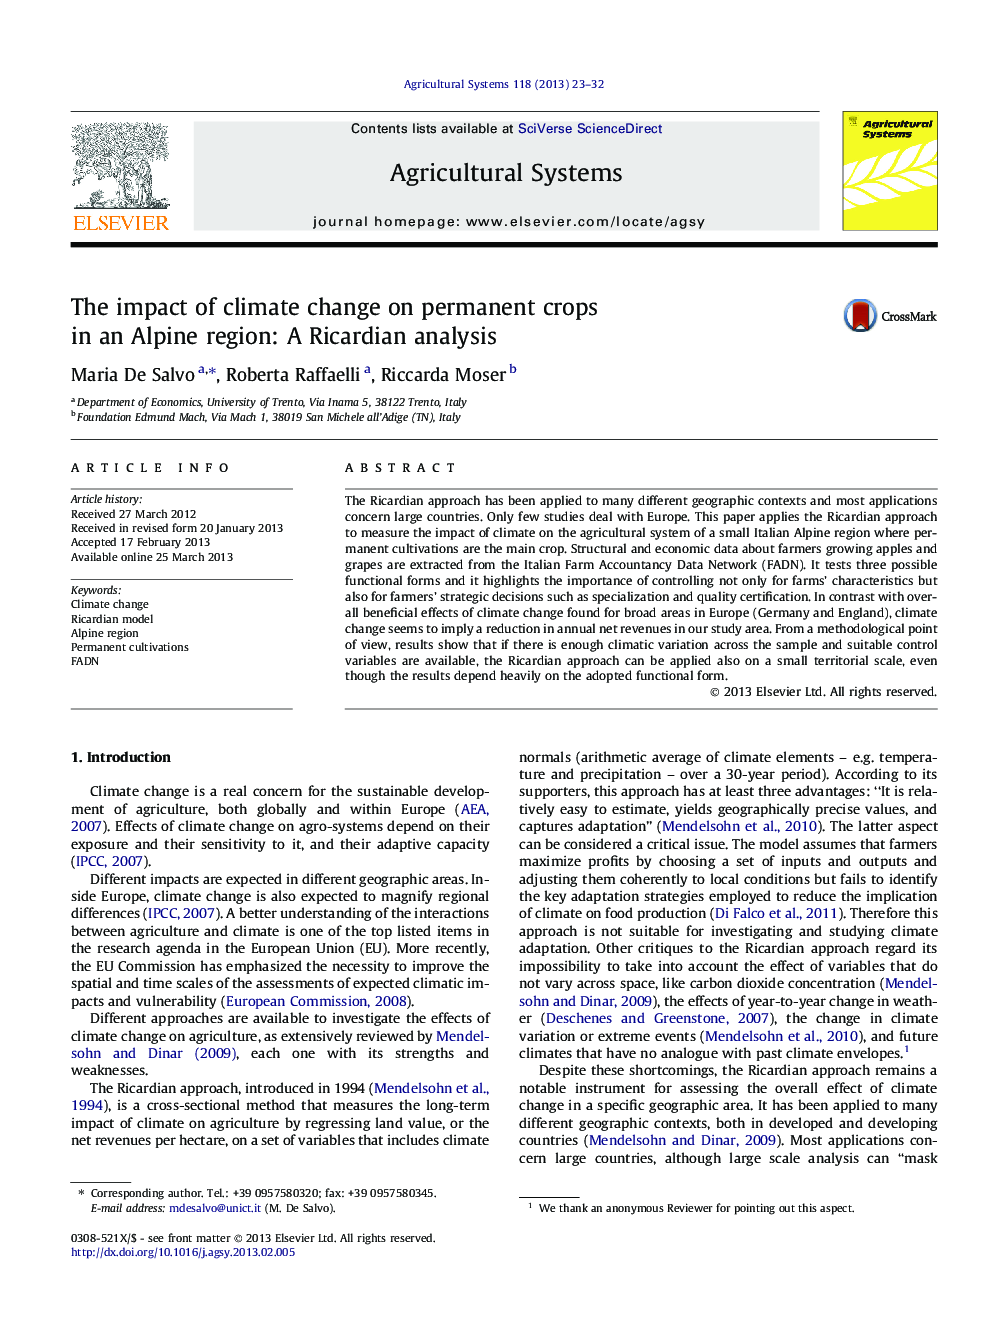 The impact of climate change on permanent crops in an Alpine region: A Ricardian analysis